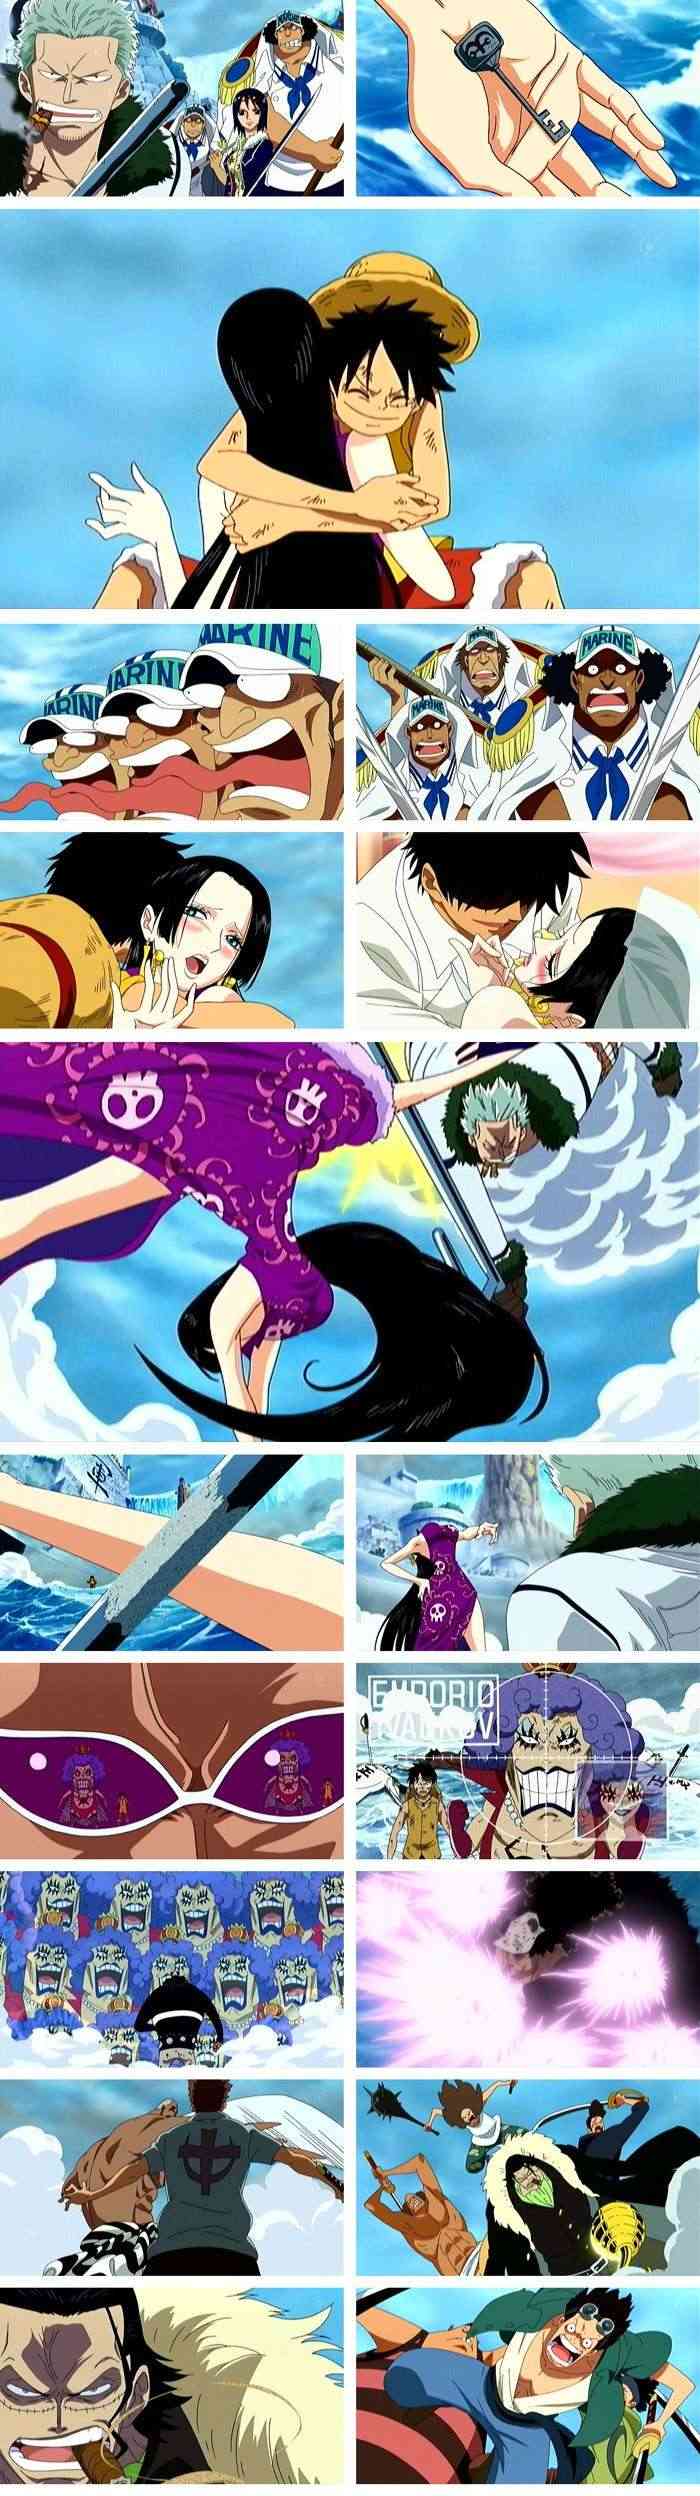 one piece annime - Page 4 Op-46910